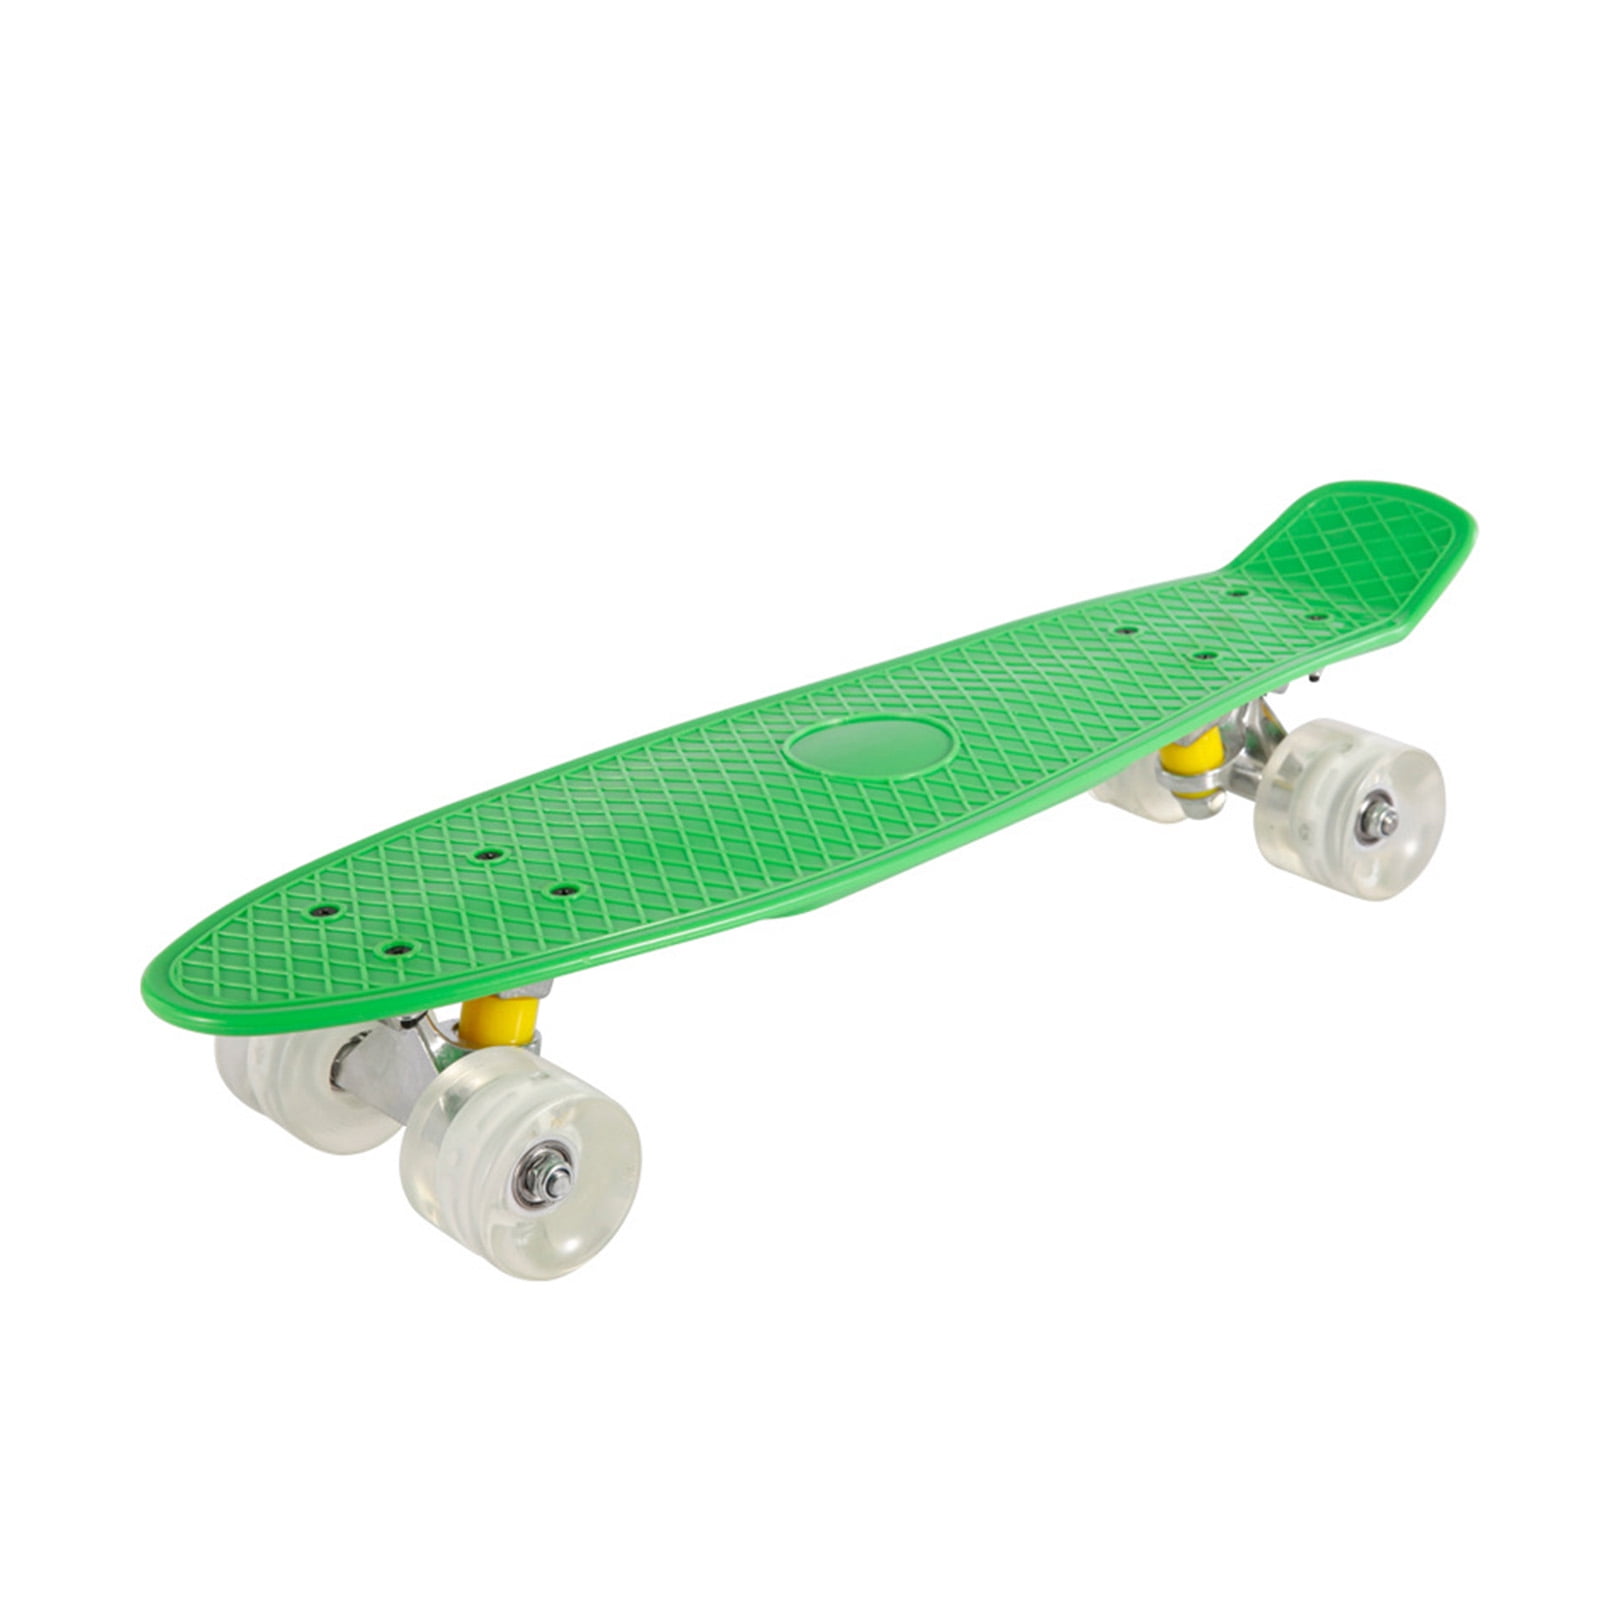 Details about   22 Inch Complete Mini Cruiser Skateboard with LED Light Up Wheels for Kids_Teens 